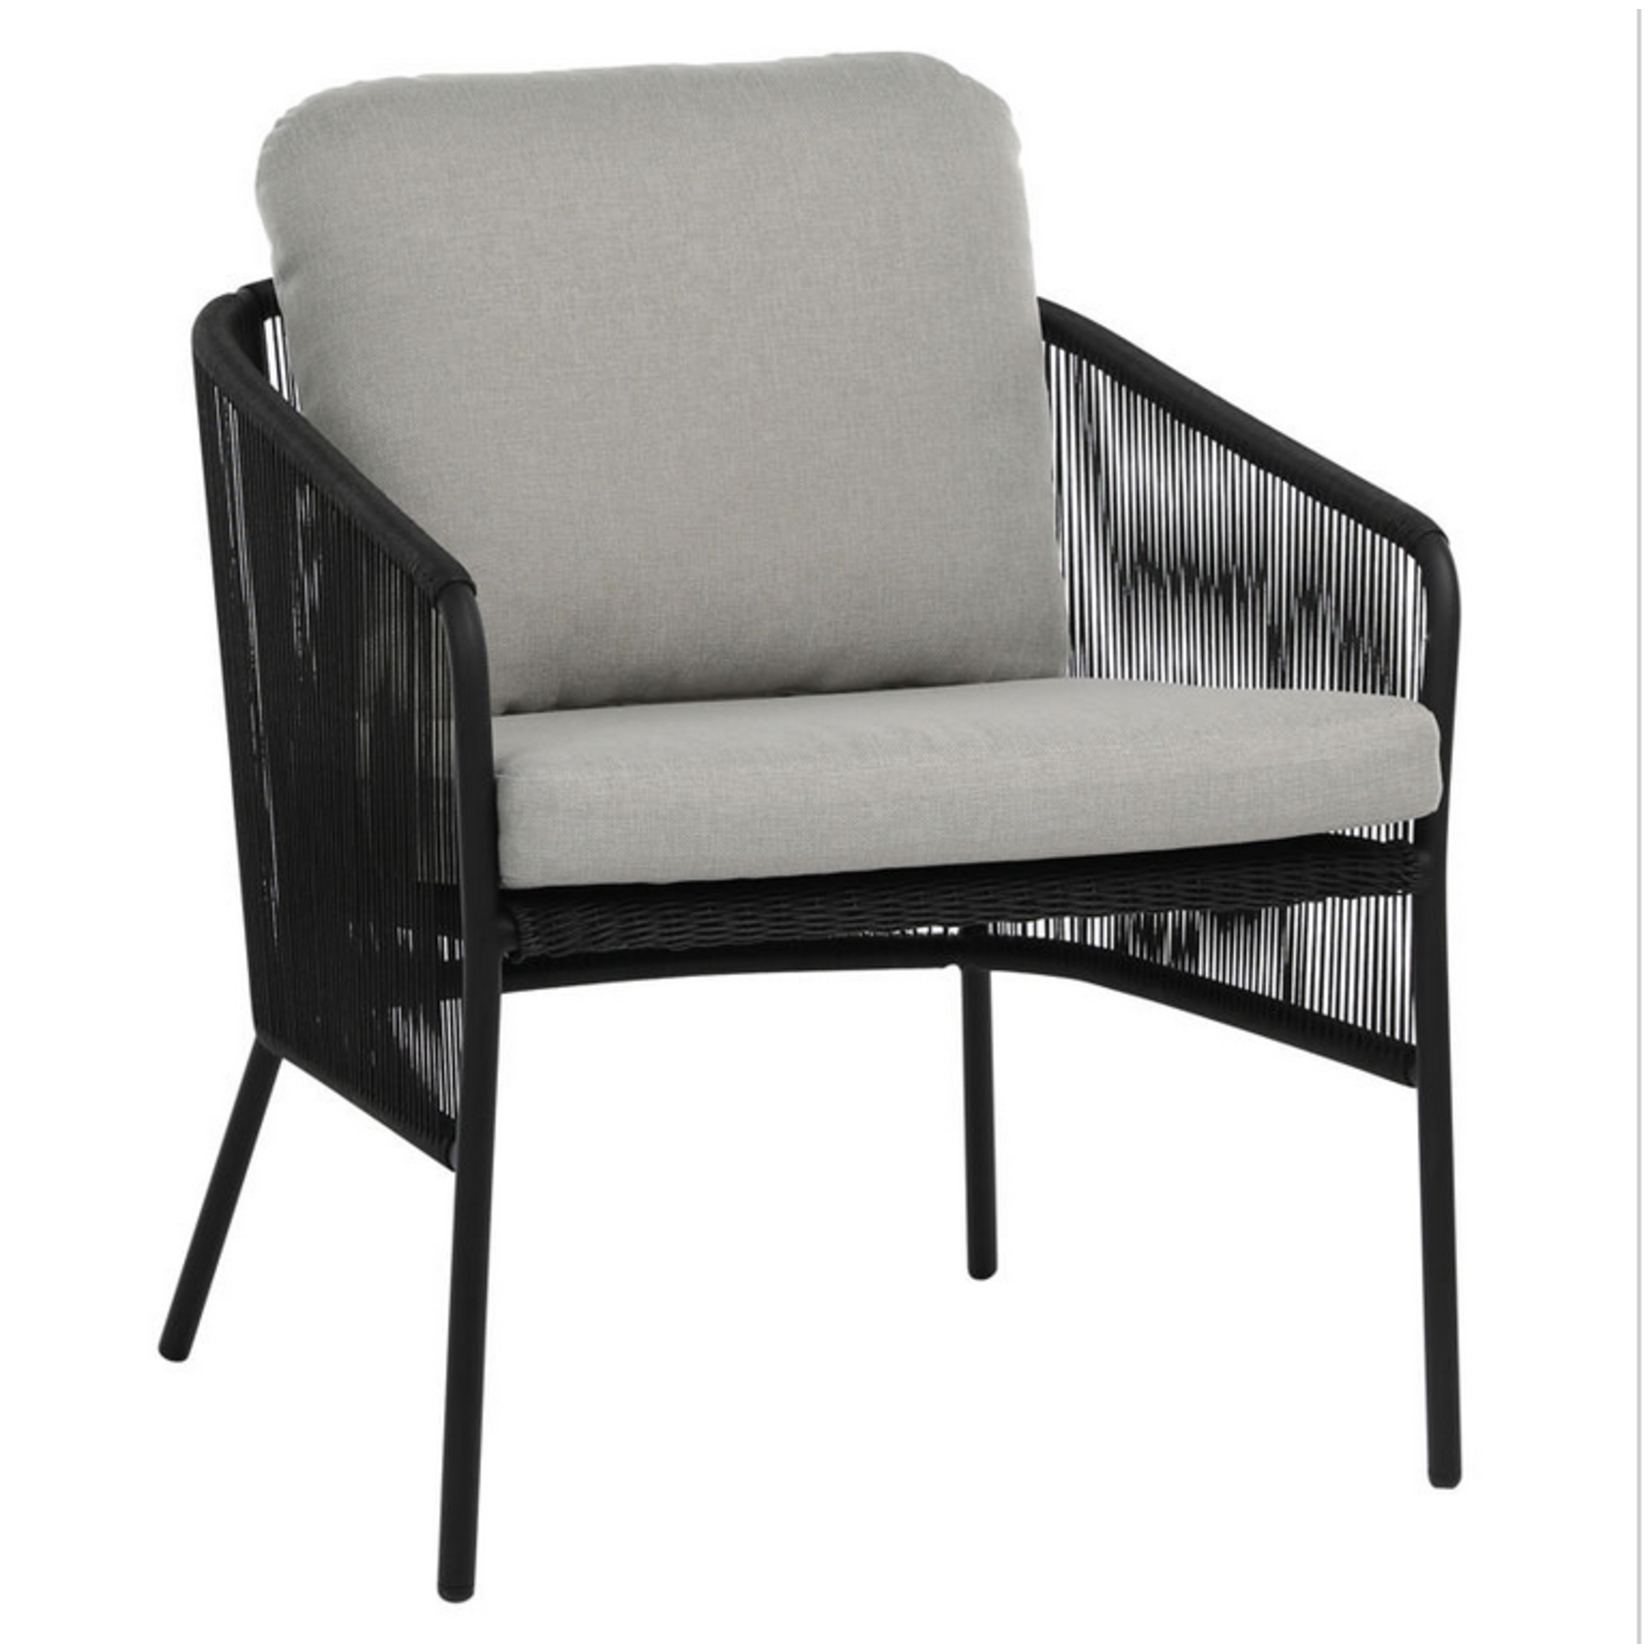 Dovetail Dovetail -Hansley Outdoor Occassional Chair with Cushions